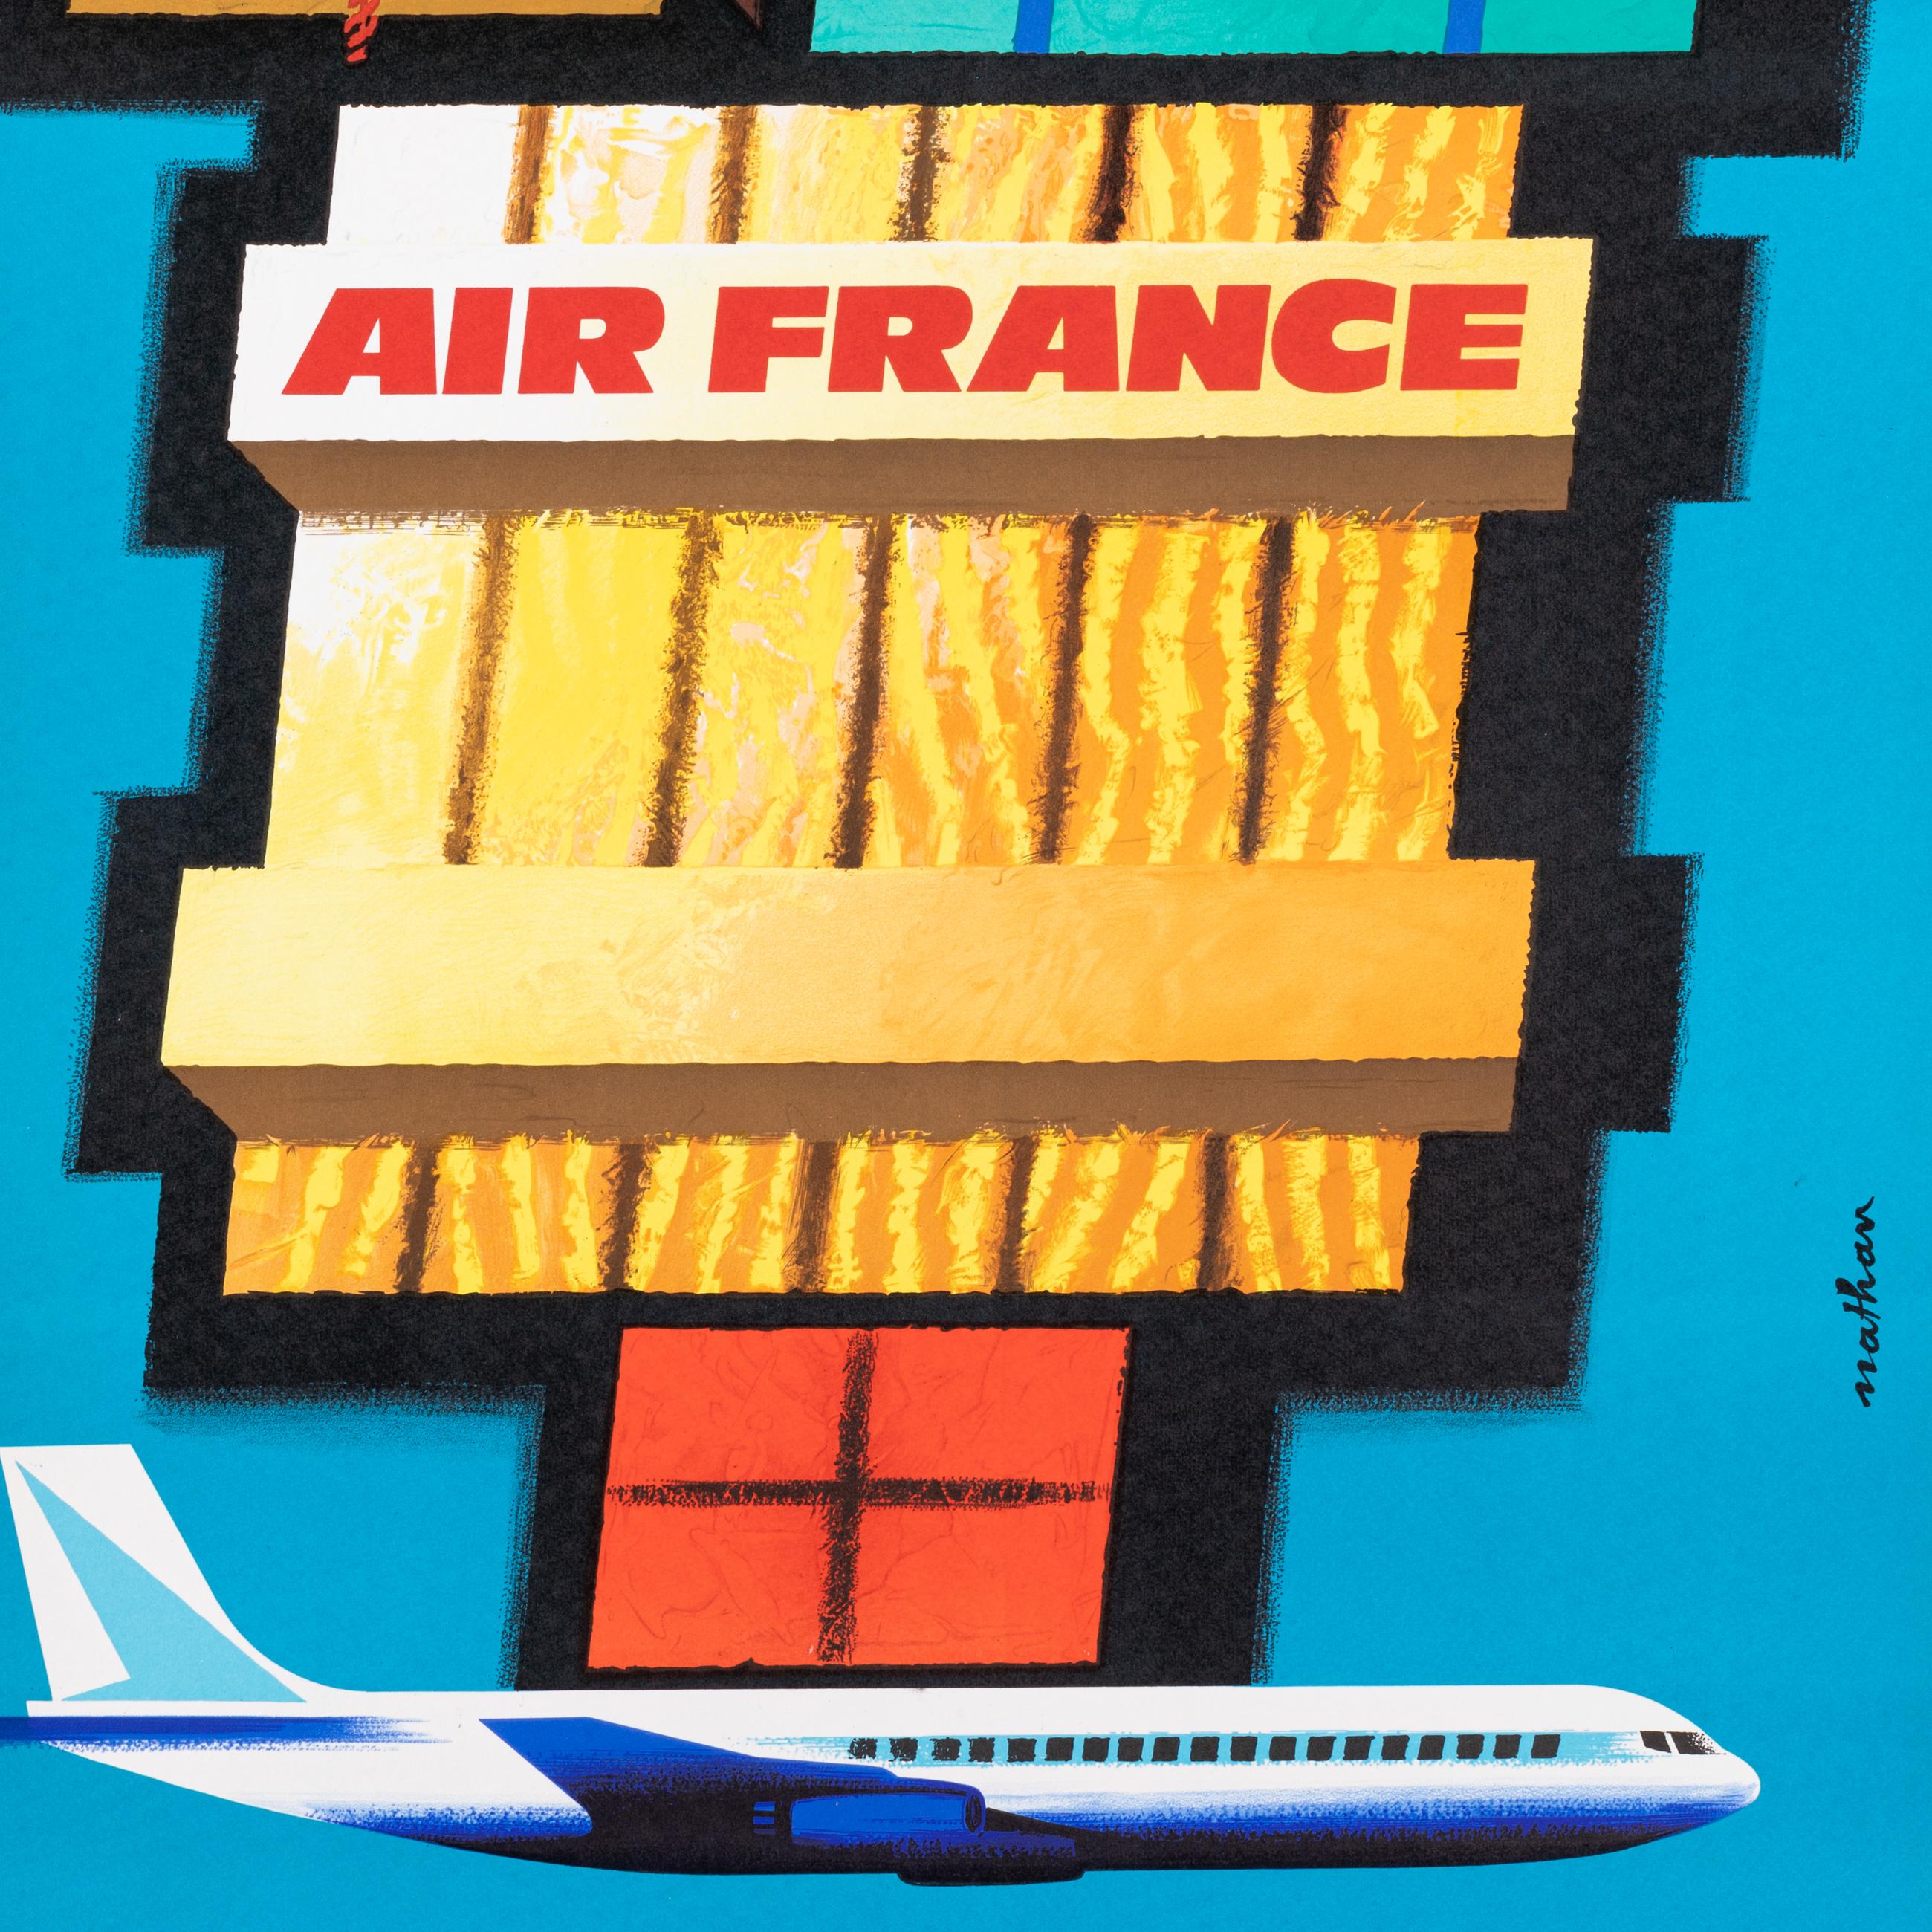 Original Vintage Poster for Air France created by Nathan in 1962.

Artist: Nathan
Title: Air France – Transporte tout, Partout
Date: 1962
Size (w x h): 24,6x 39.4 in / 62 x 100 cm
Printer : Imp. S.A. Courbet_Paris
Materials and Techniques: Colour